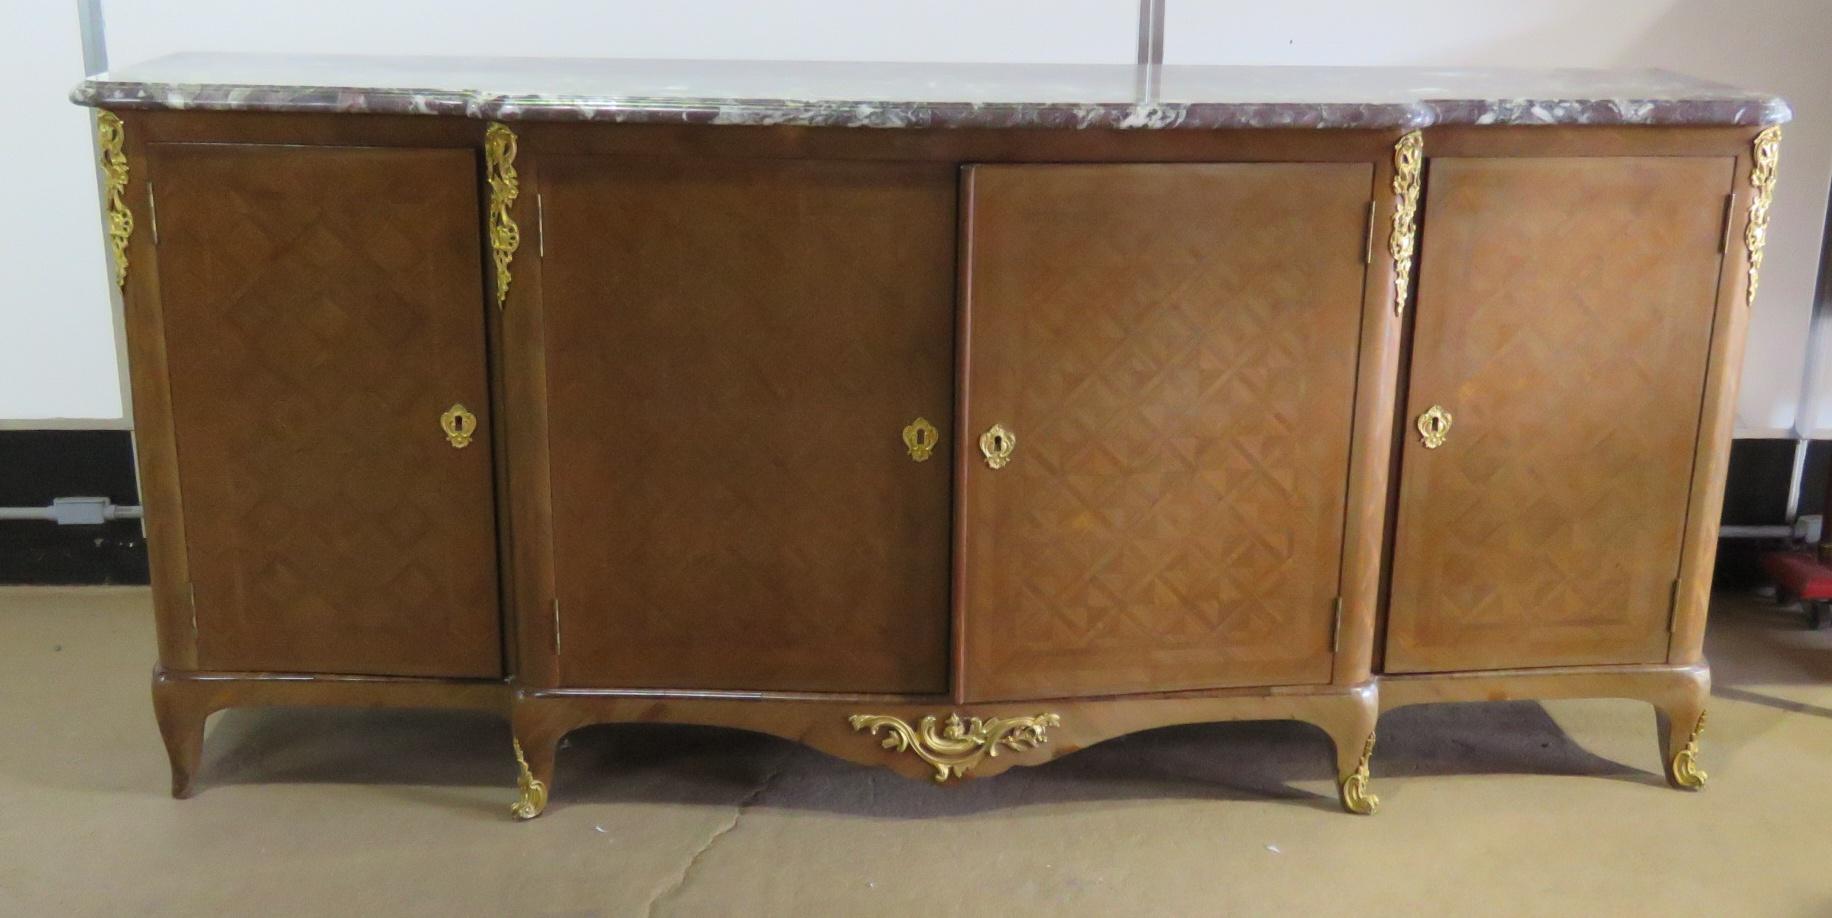 French Louis XVI style inlaid marble-top sideboard with brass accents. The 2 side doors each open to 1 drawer and 1 shelf. The centre doors open to 2 drawers and 2 shelves. Marked 